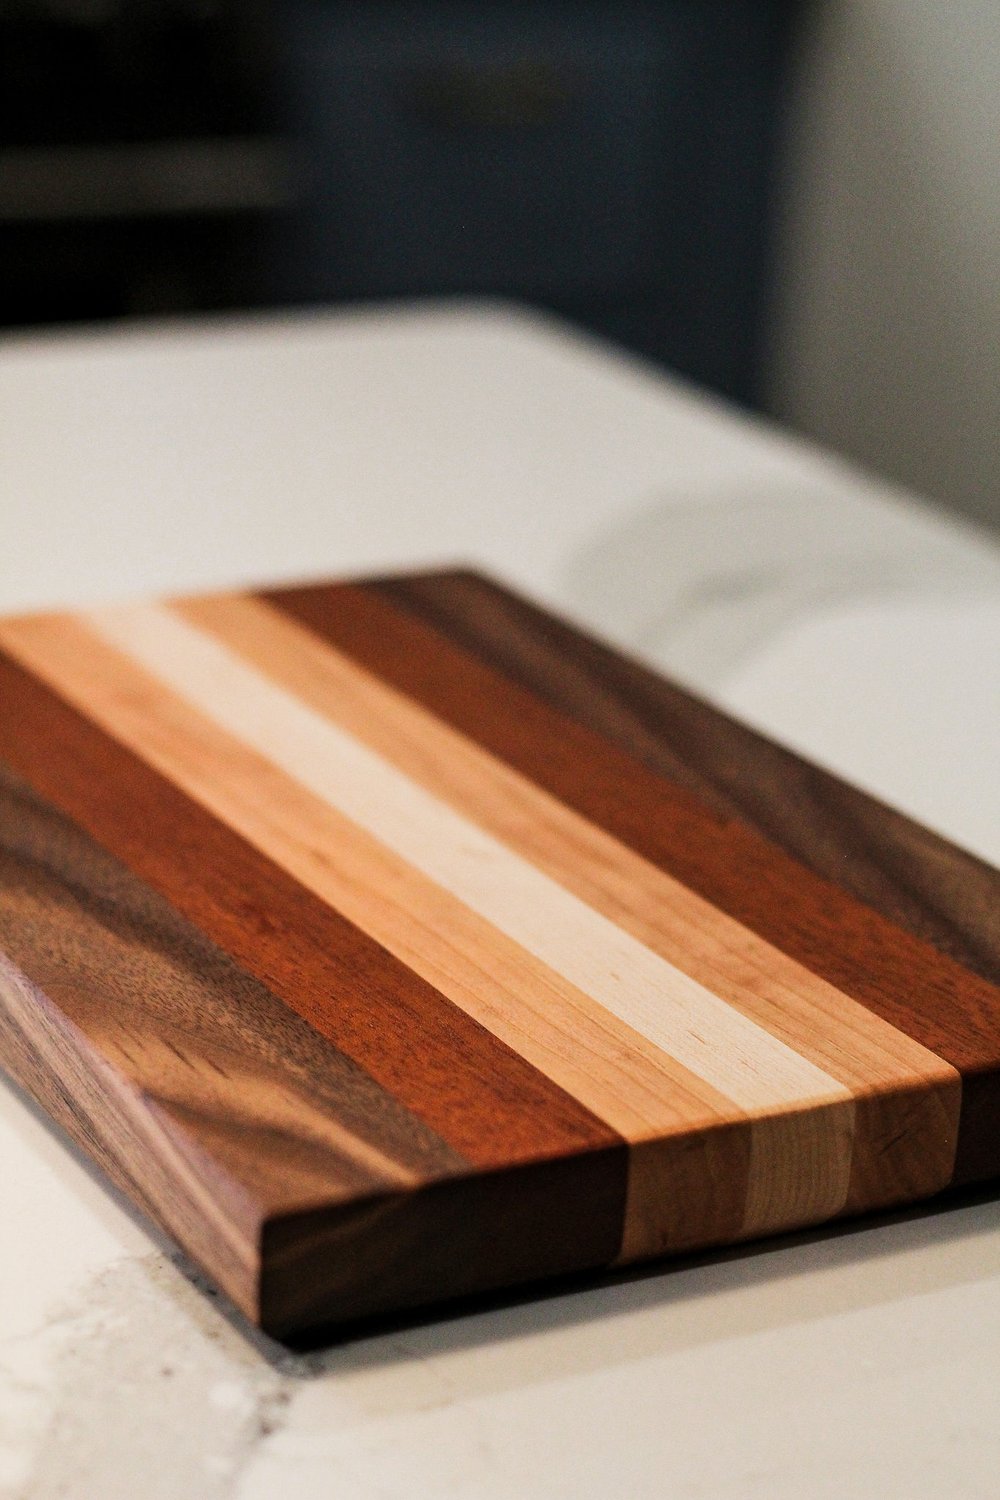 Maple Butcher Block Cutting Board - Tennessee Woodworks